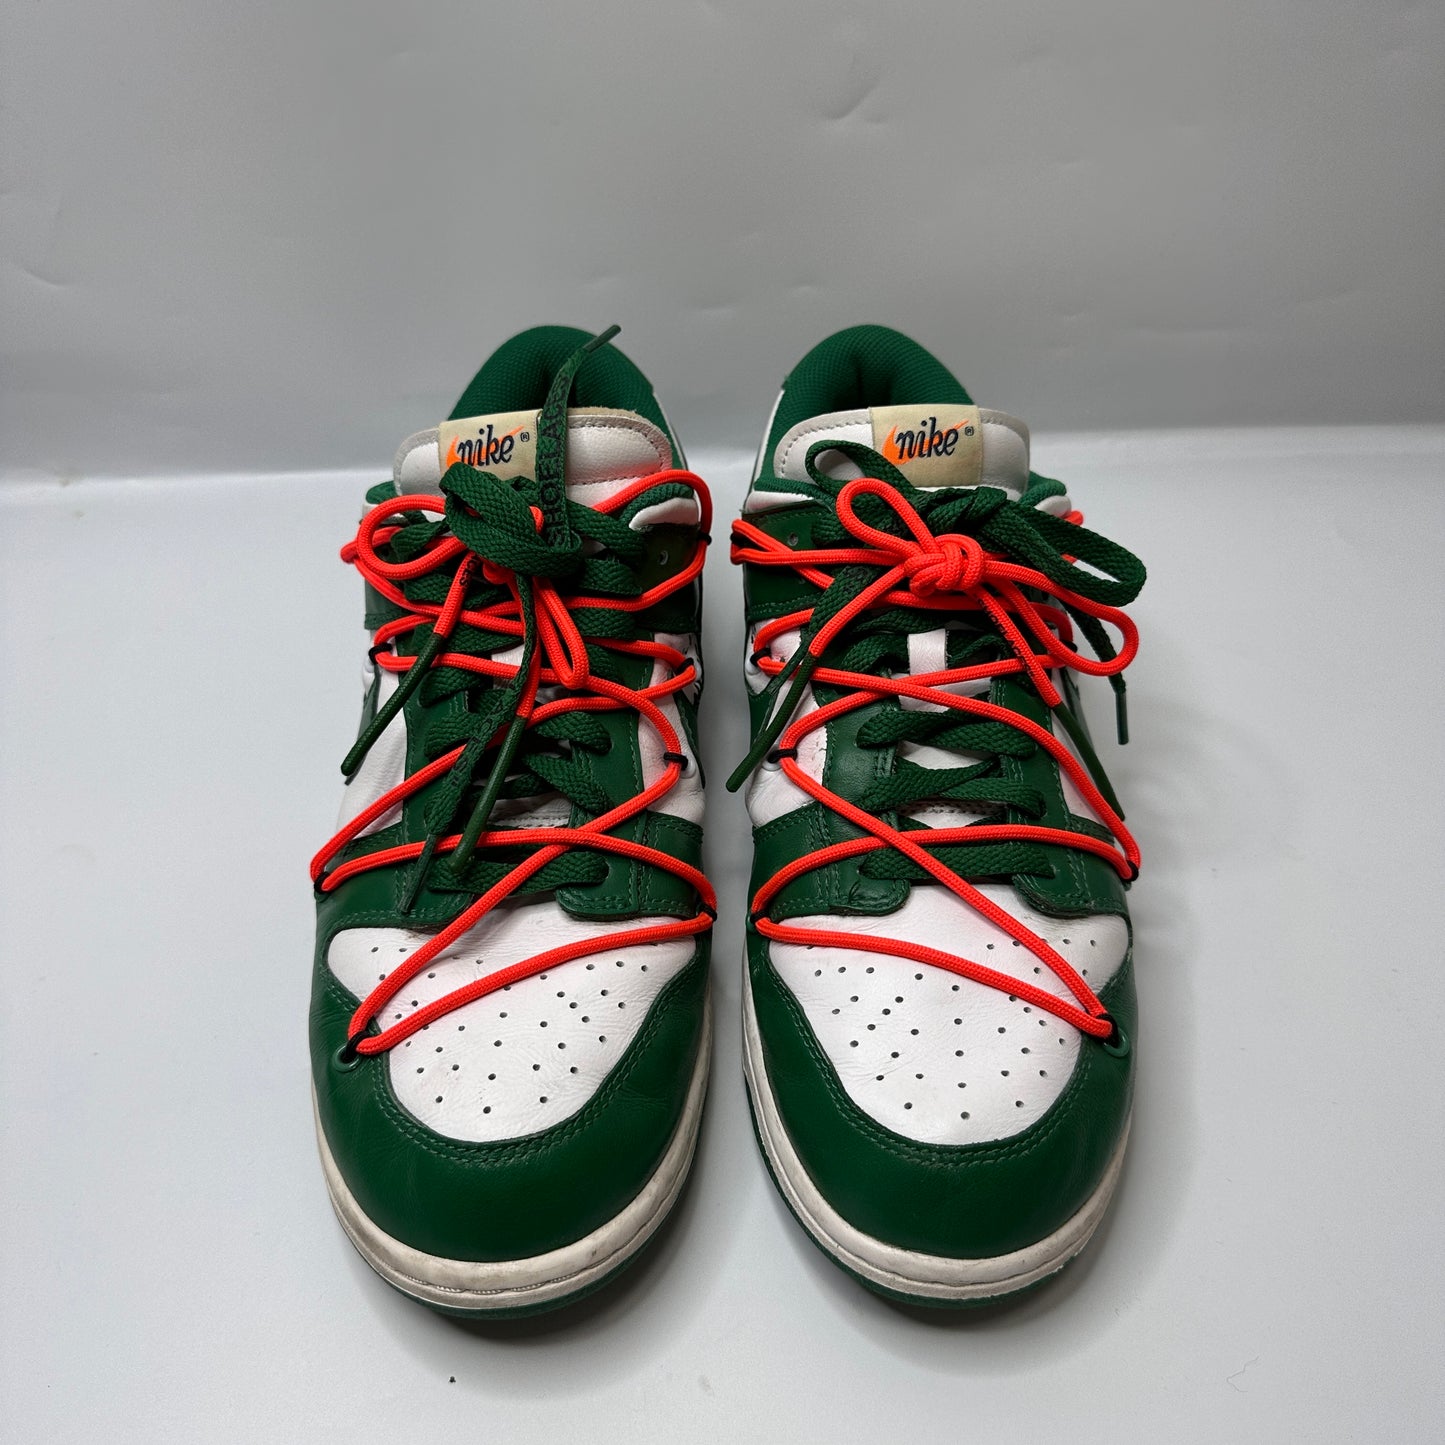 Nike Dunk Low x Off White Pine Green